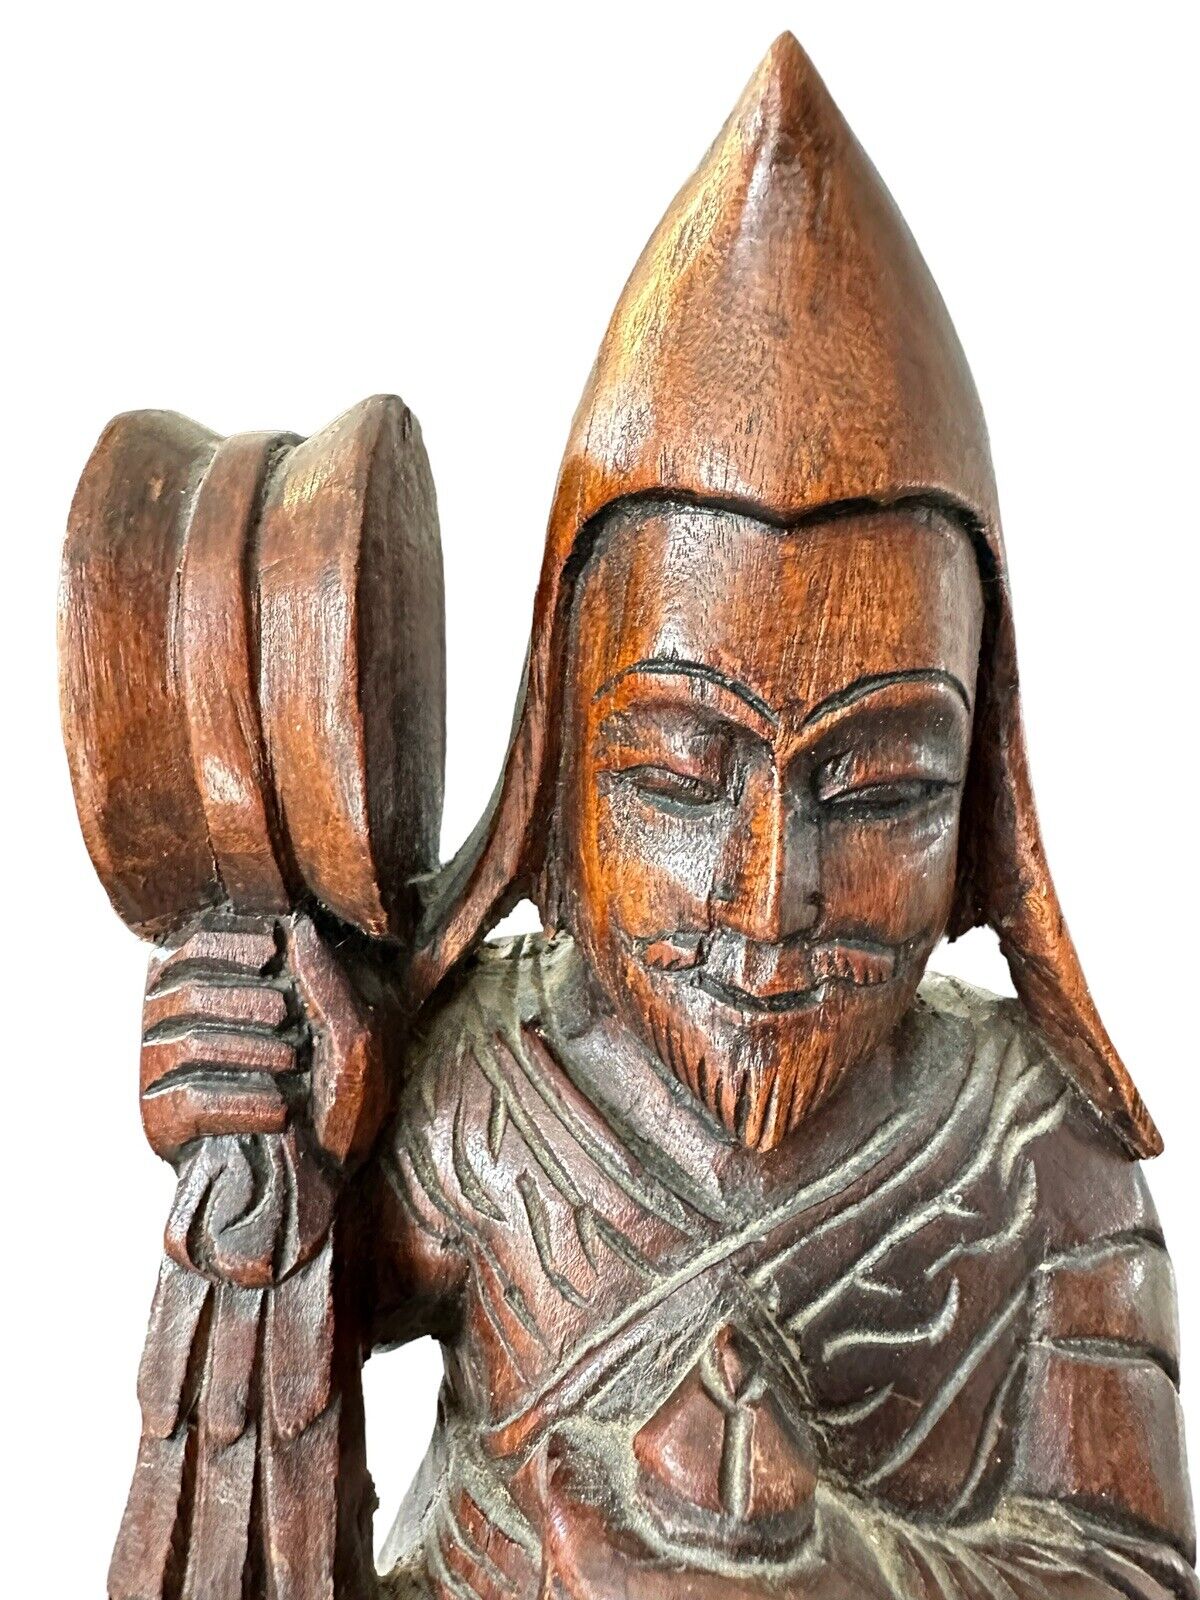 VTG Asian Man Beautifully Hand Carved Wood (Possibly Monk Or Holy Man) 12 1/2”